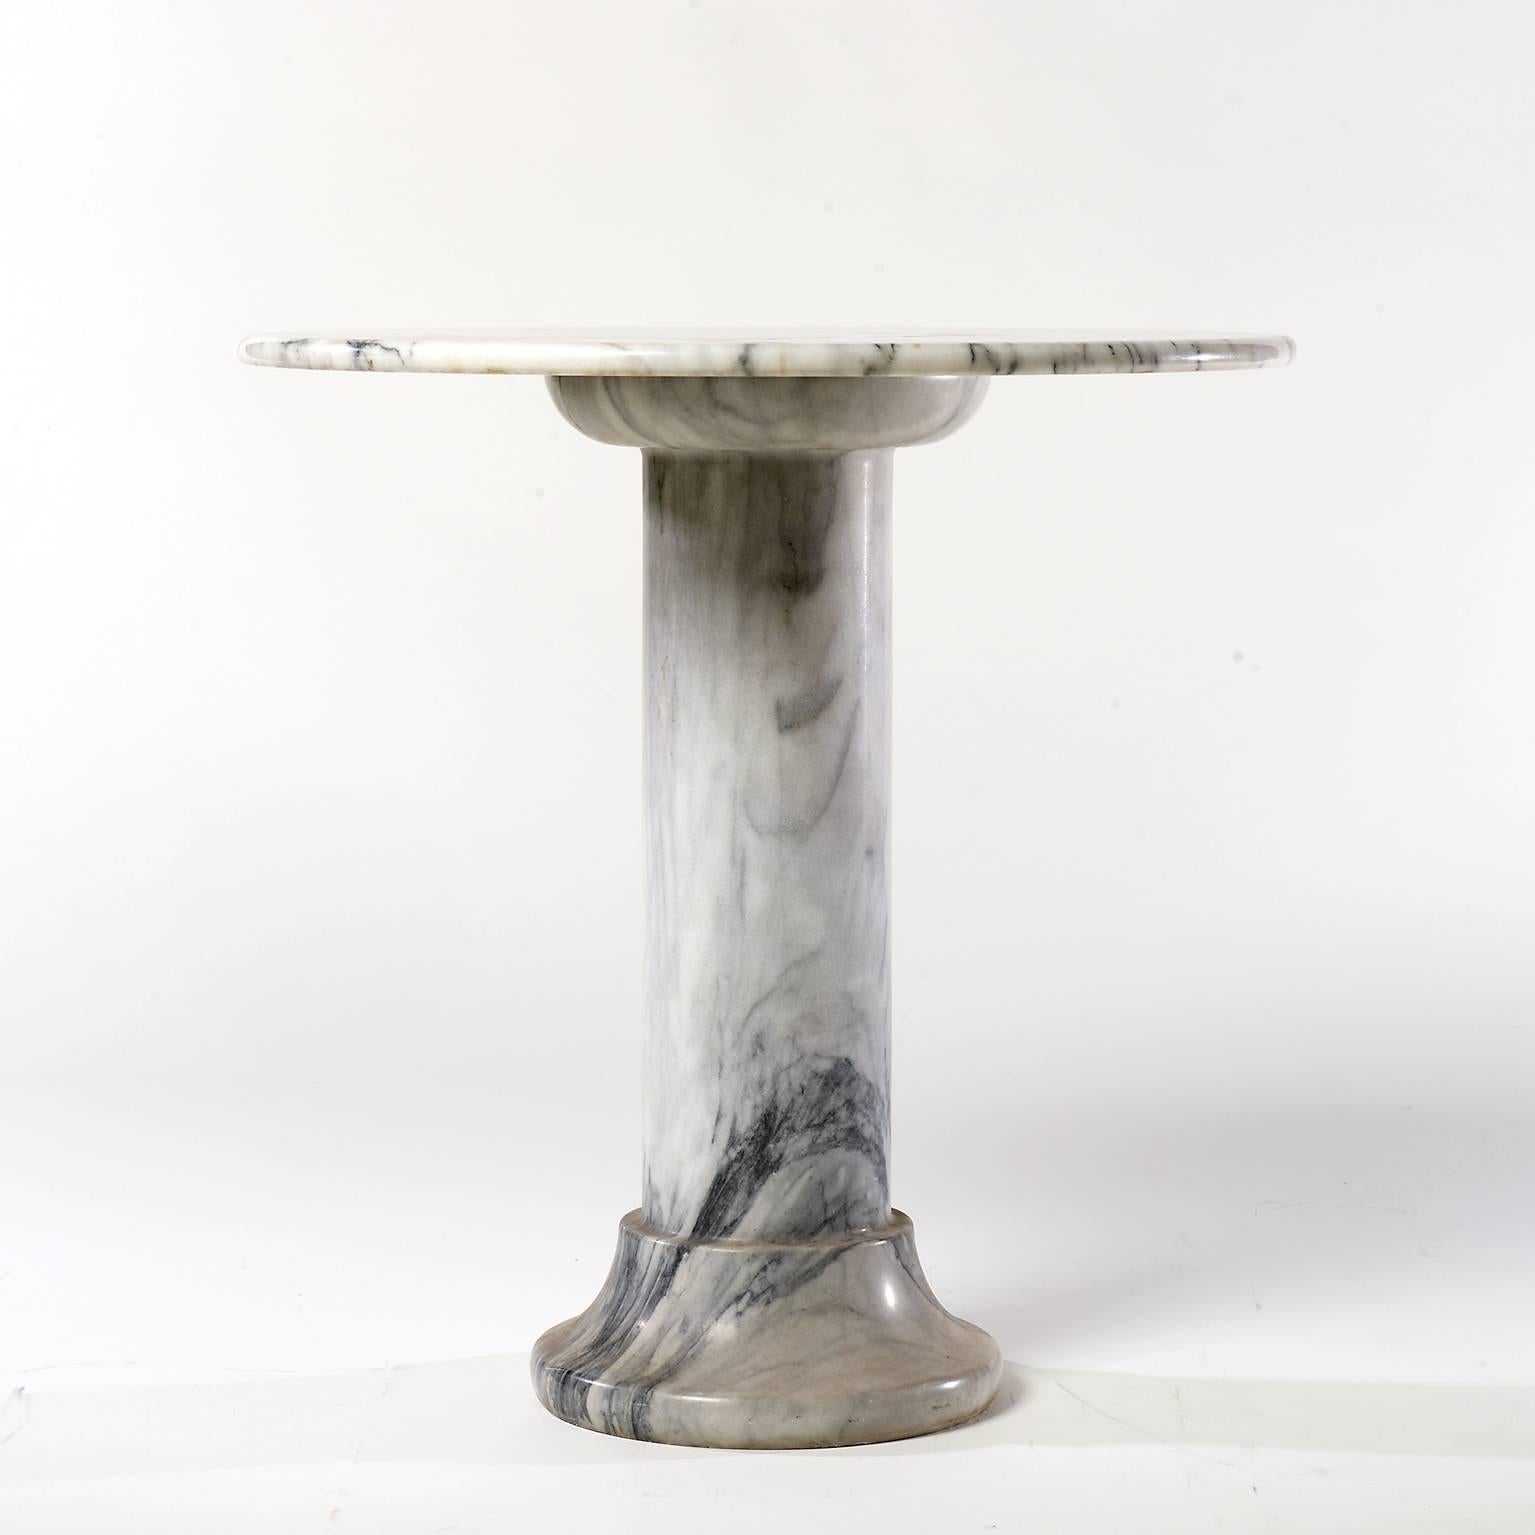 This midcentury solid marble side table was made circa 1975.
The marble has a beautiful structure and some lovely details.